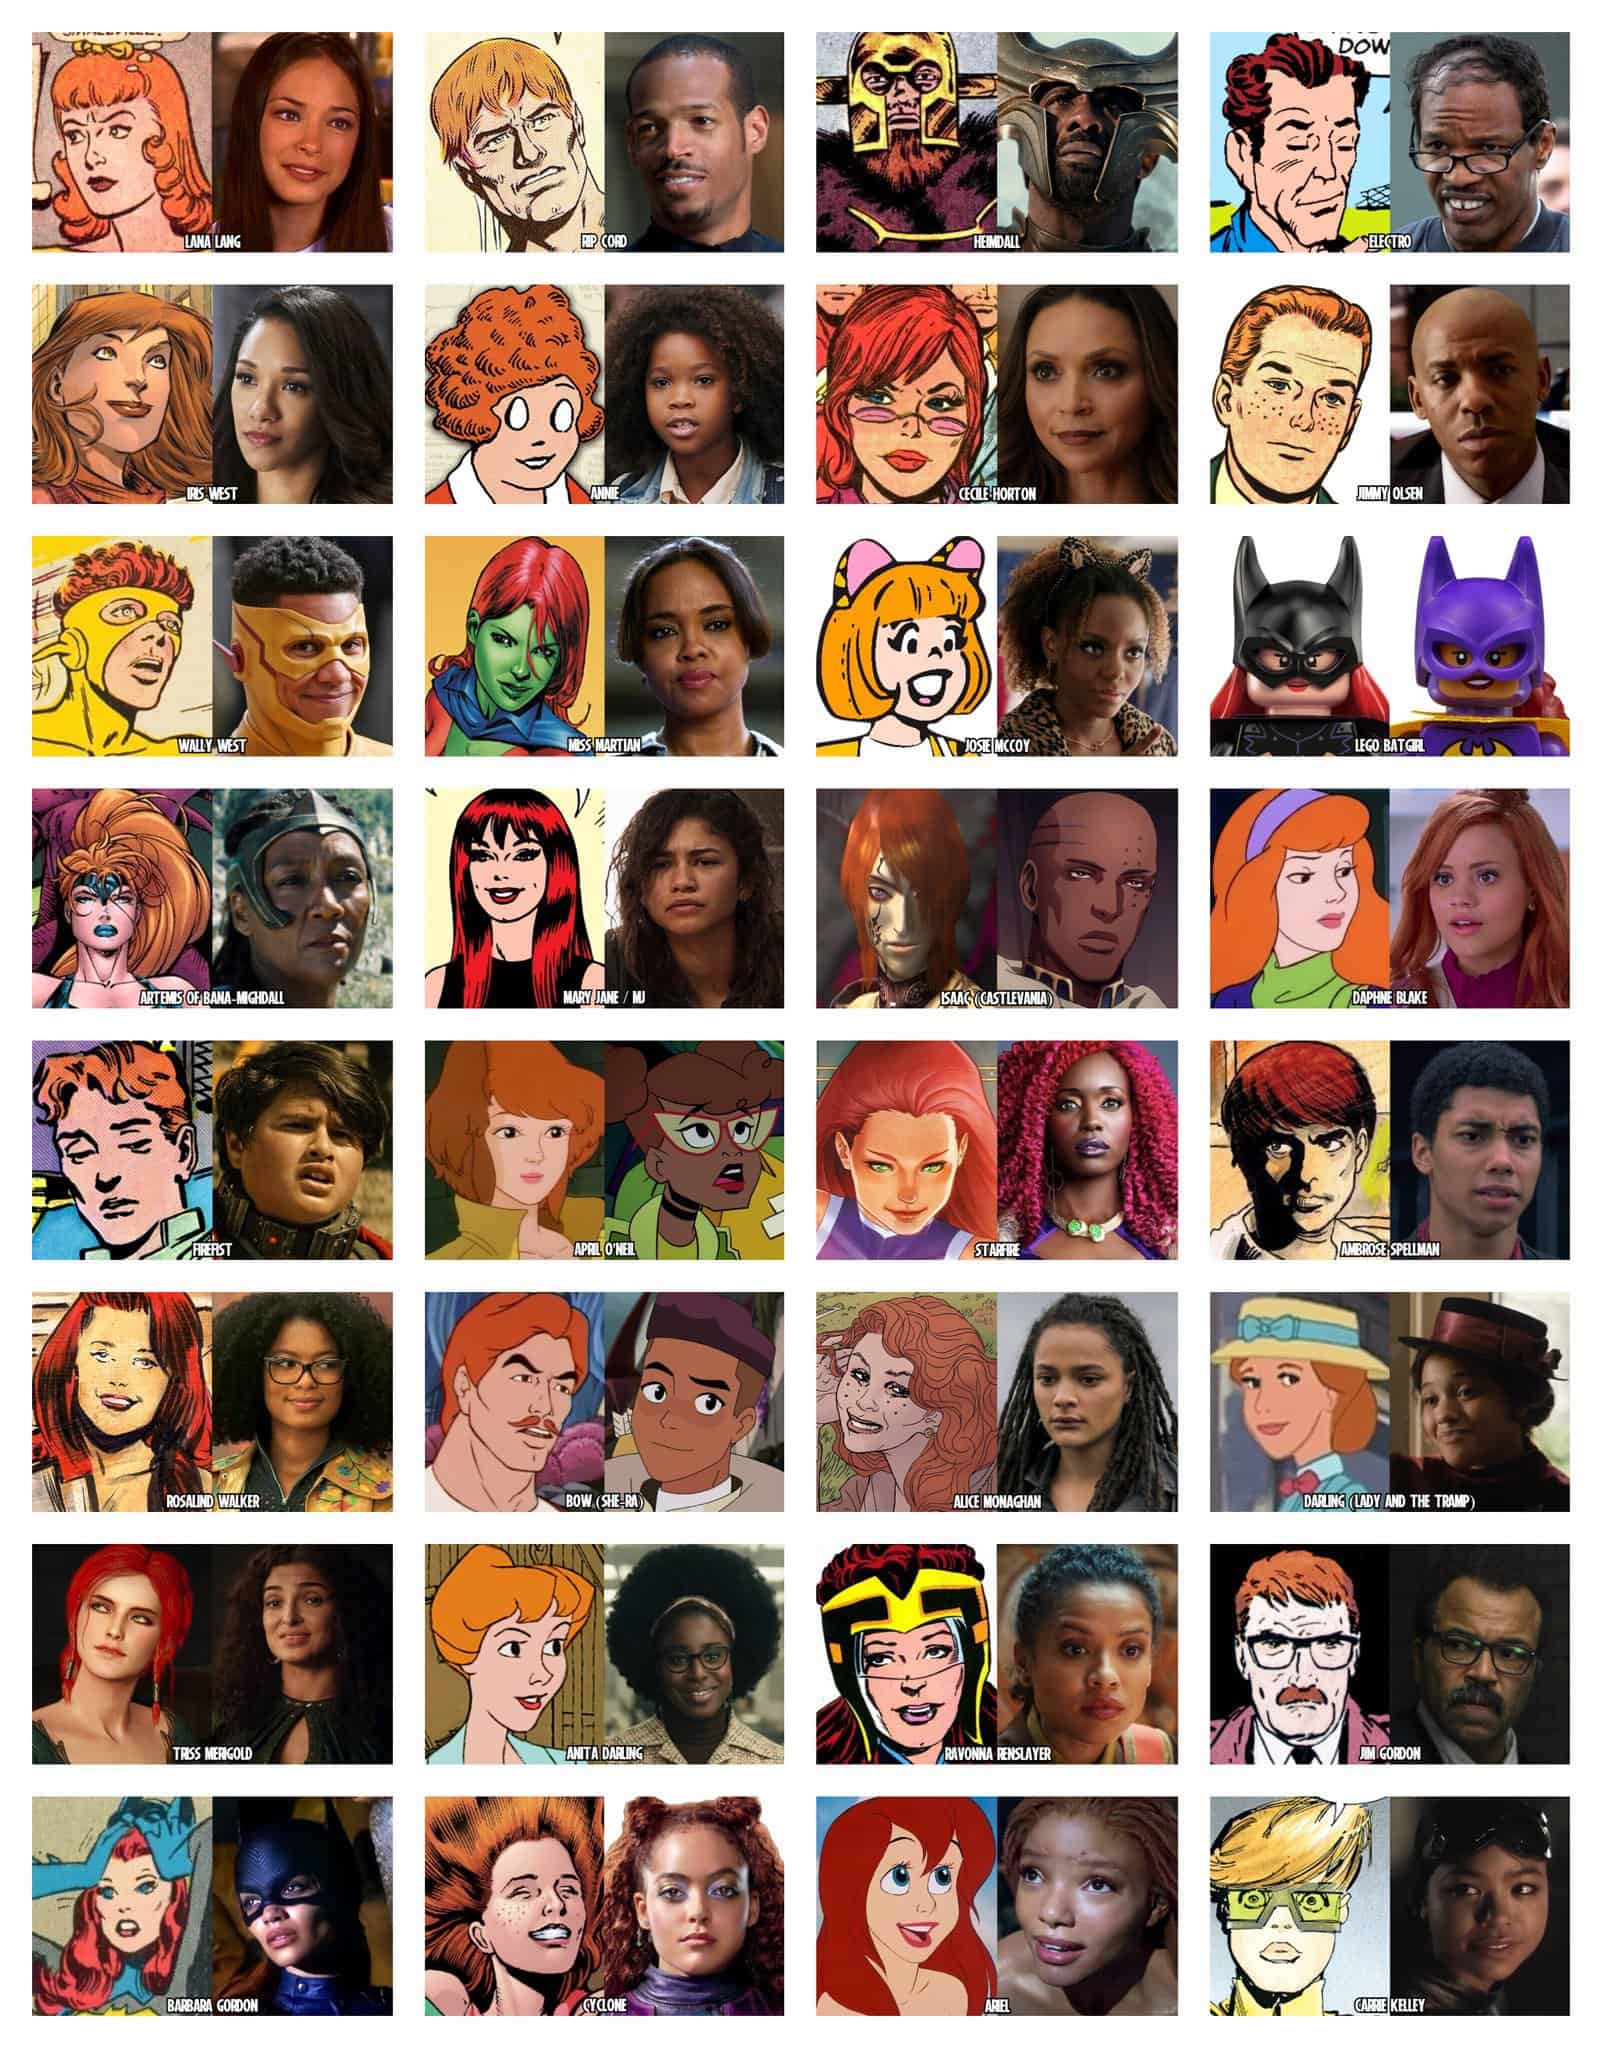 hollywood-replaces-red-hair-characters.jpg